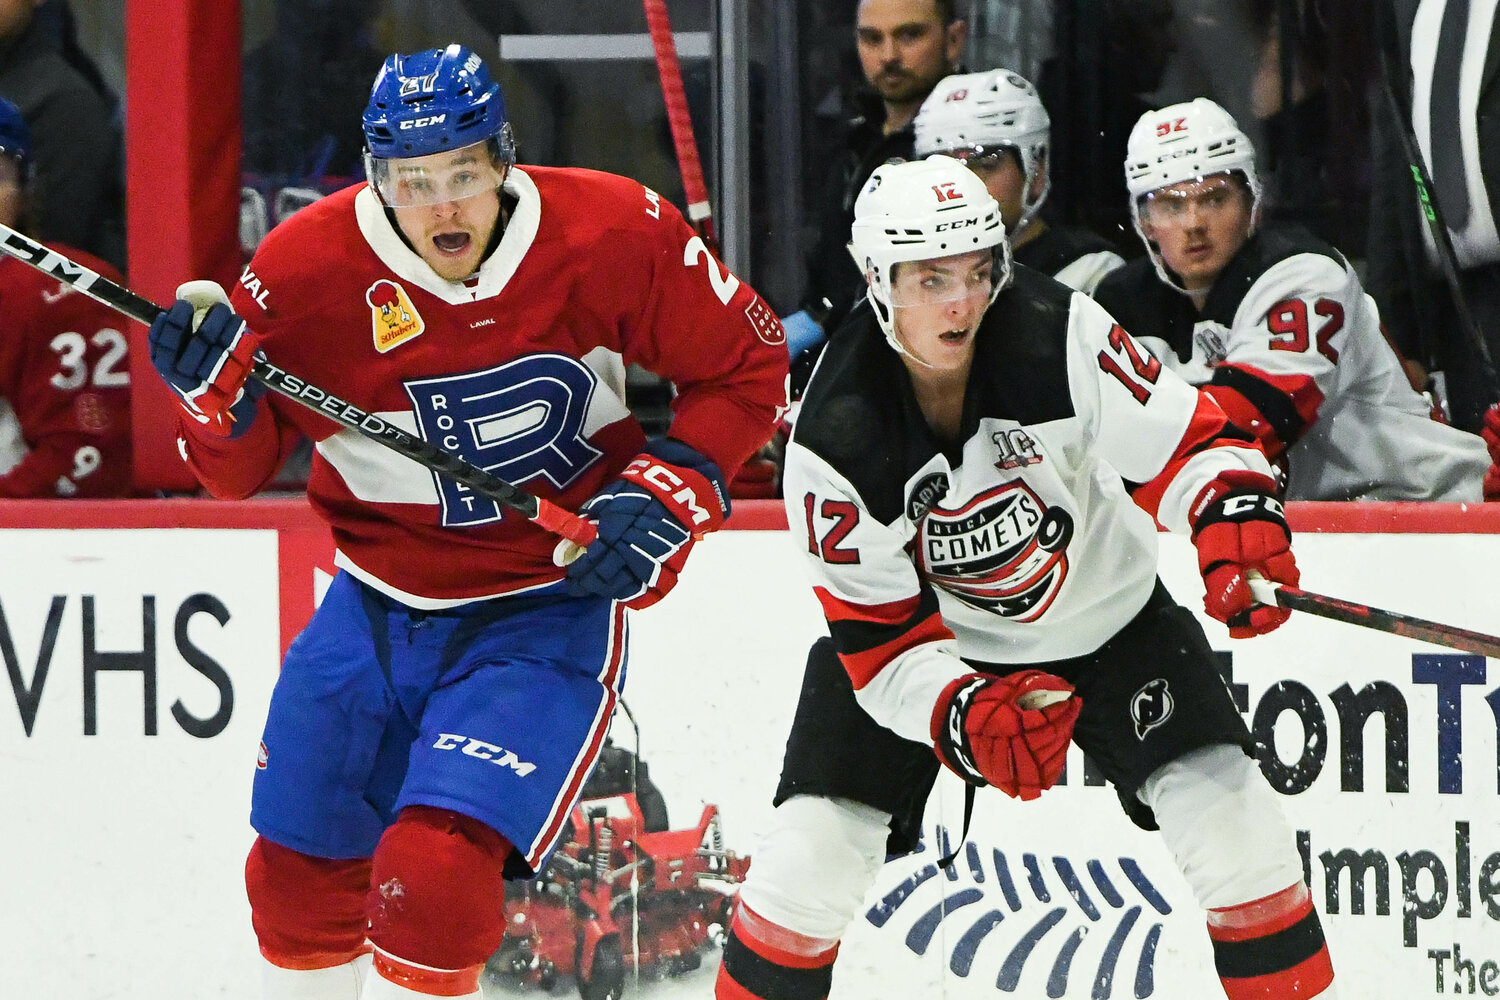 The Utica Comets and Laval Rocket are set to clash in a best-of-three series beginning Wednesday in Quebec. Utica was 1-3-2-0 against Laval this season.